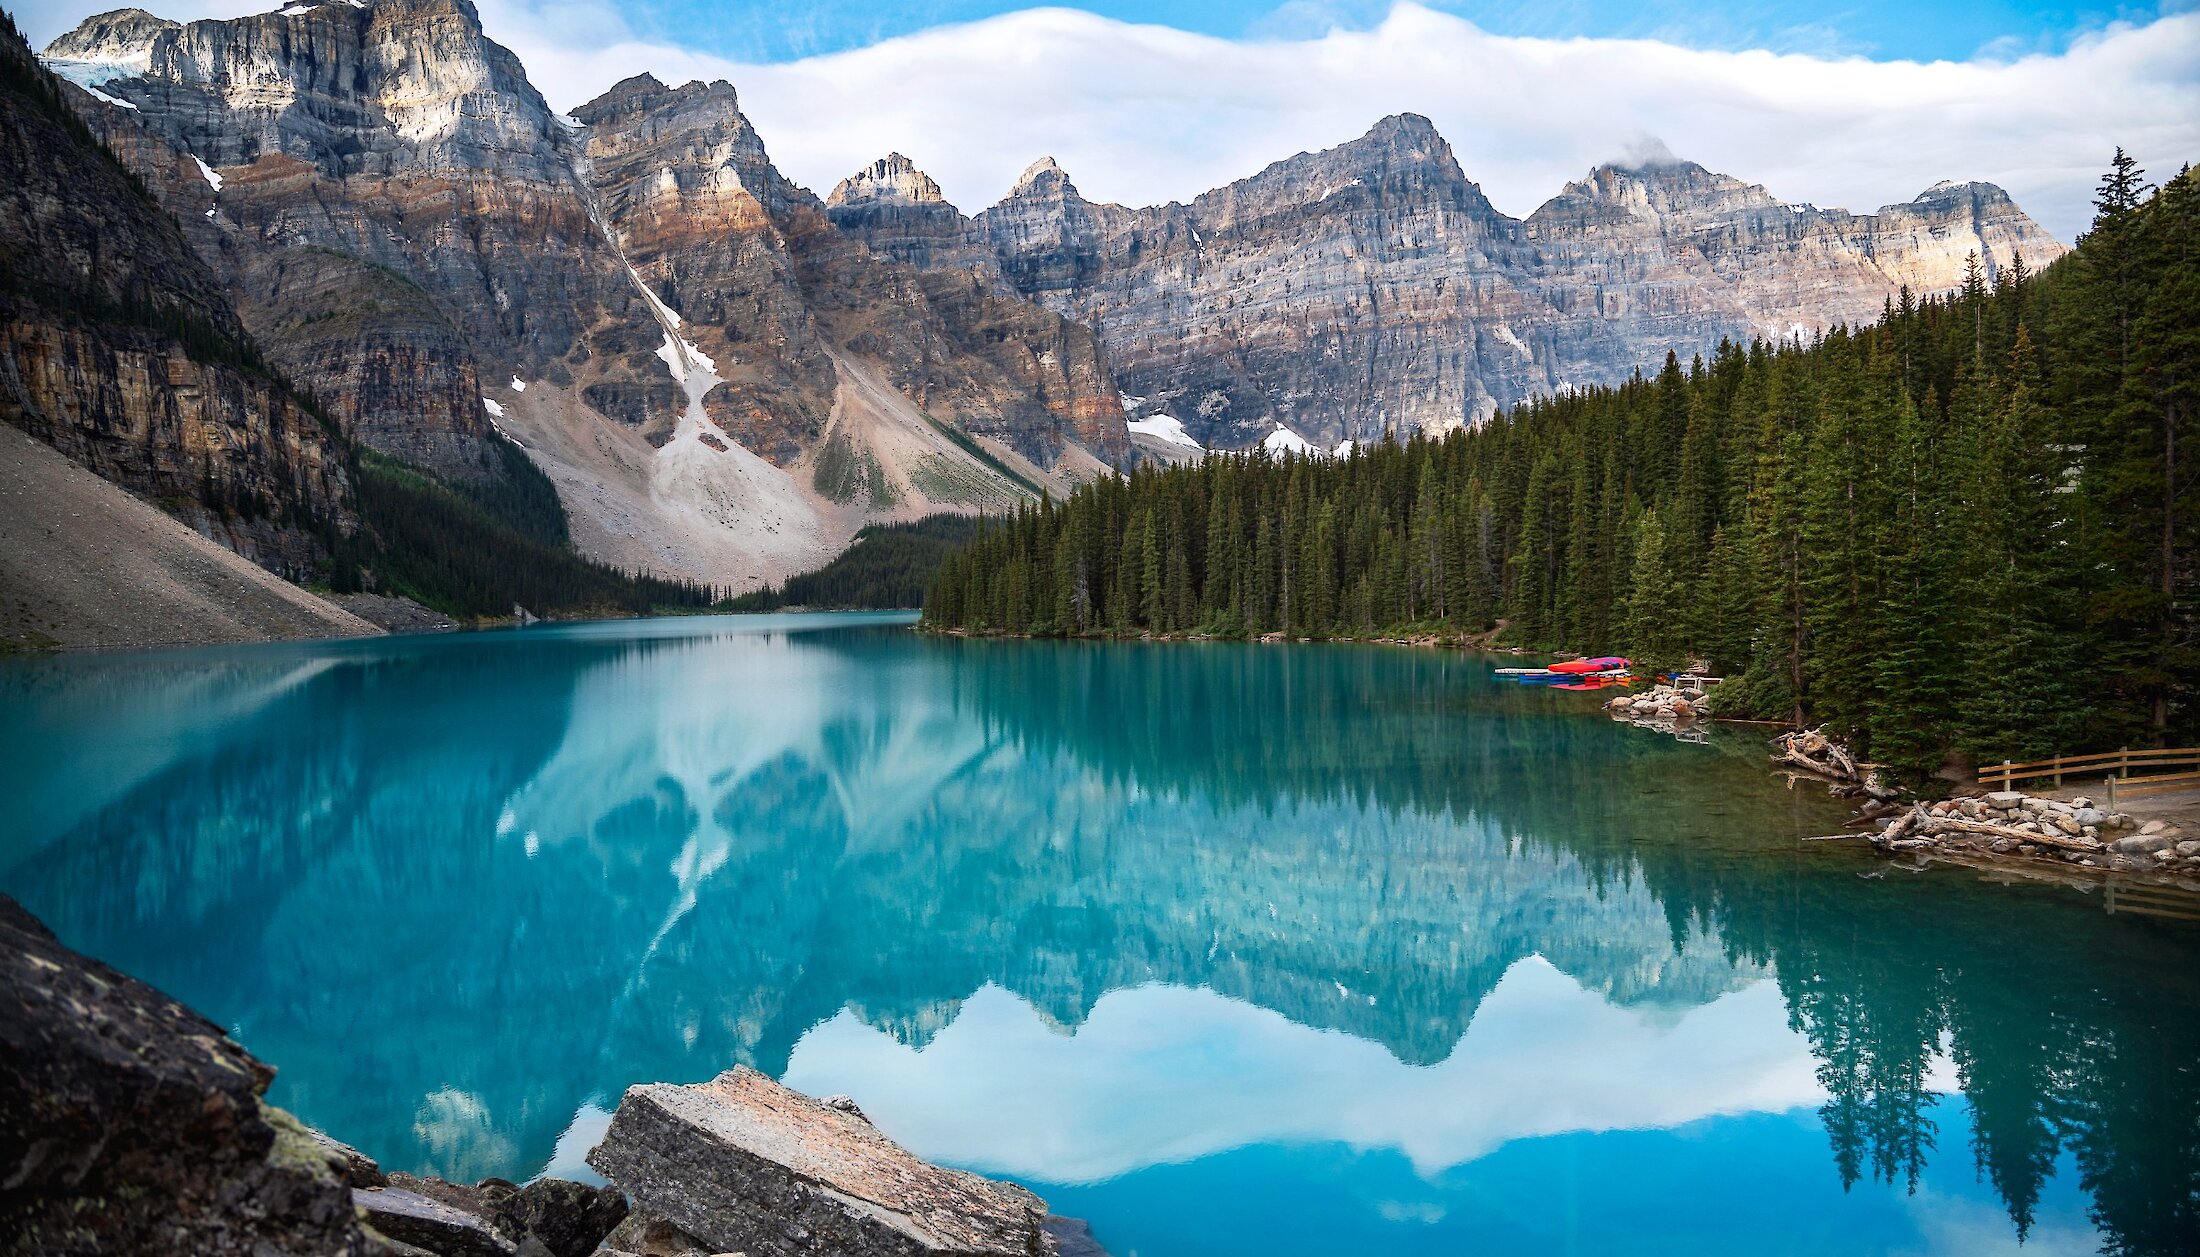 View of Moraine Lake's stunning turquoise water from the rockpile